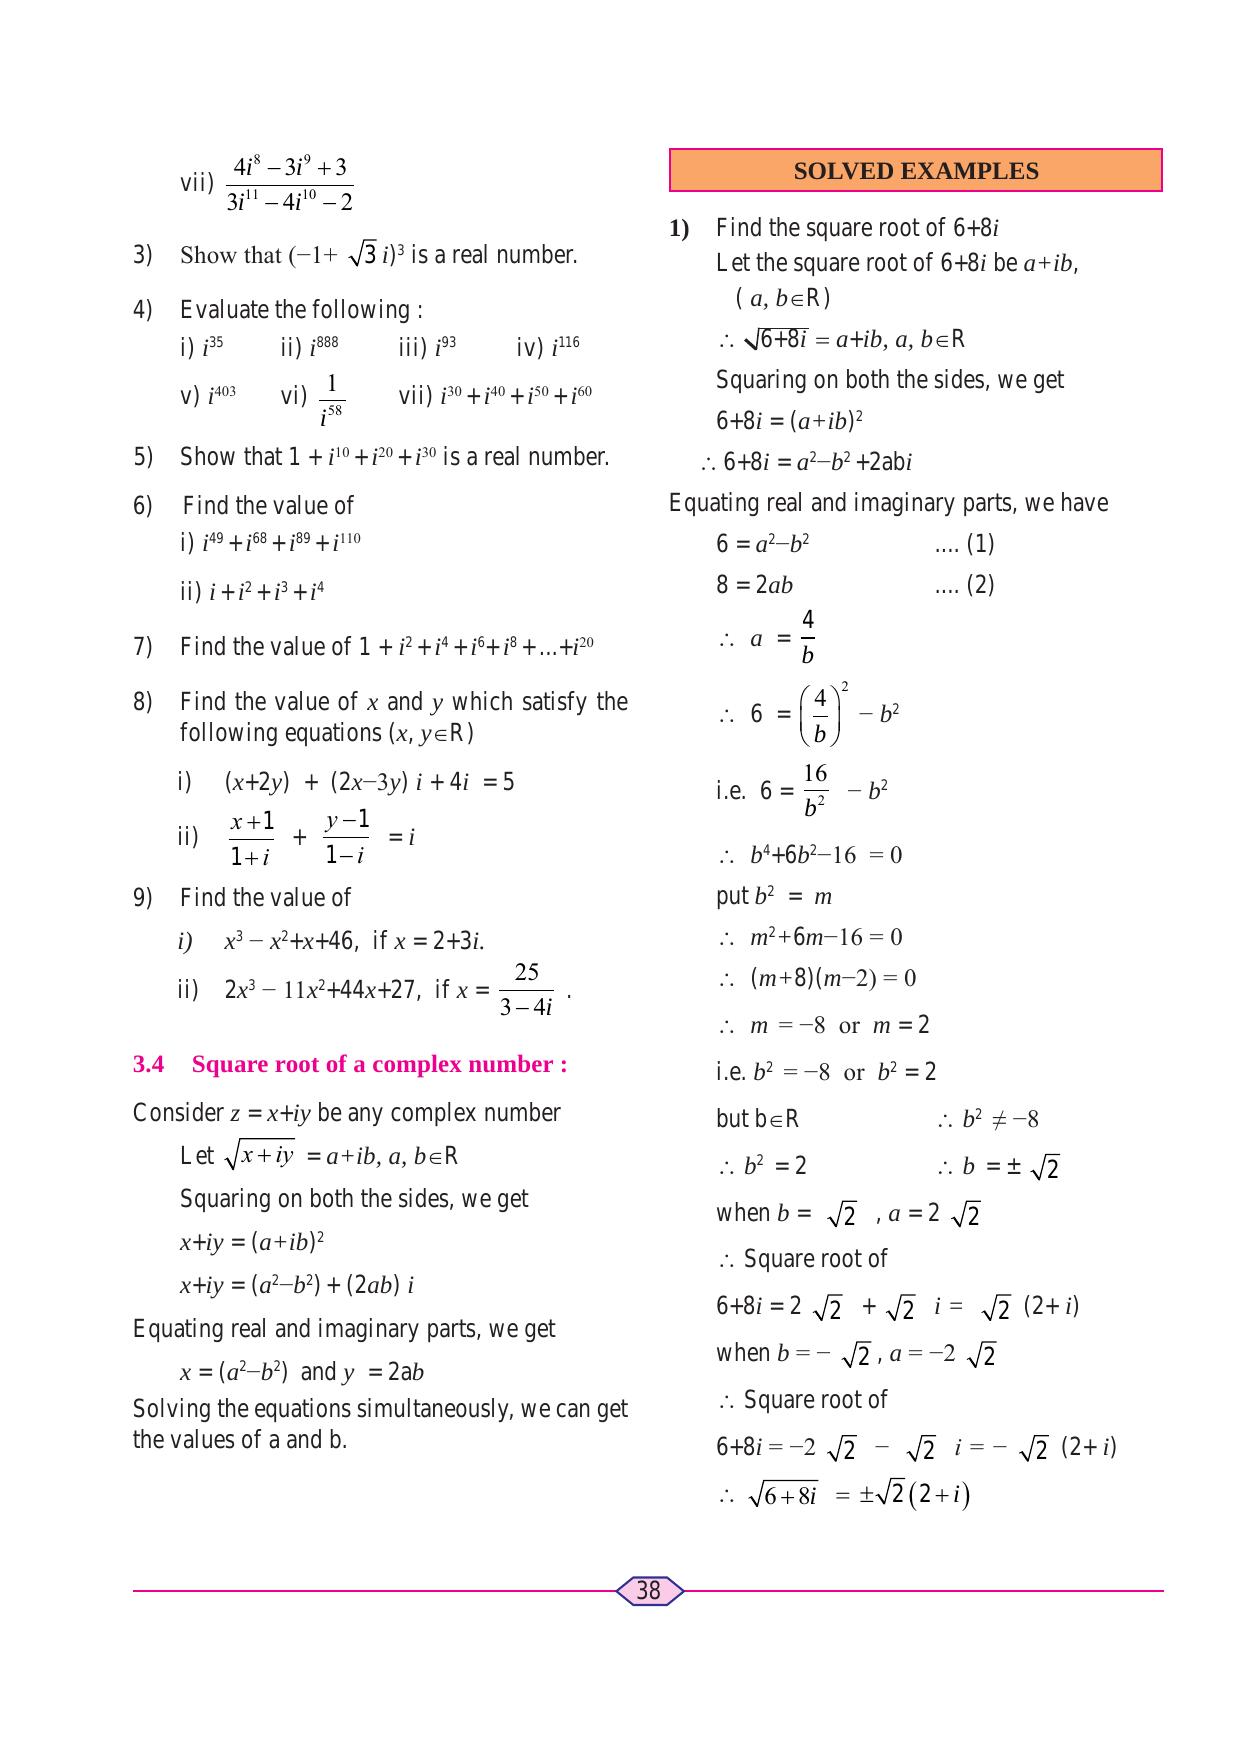 Maharashtra Board Class 11 Maths (Commerce) (Part 1) Textbook - Page 48